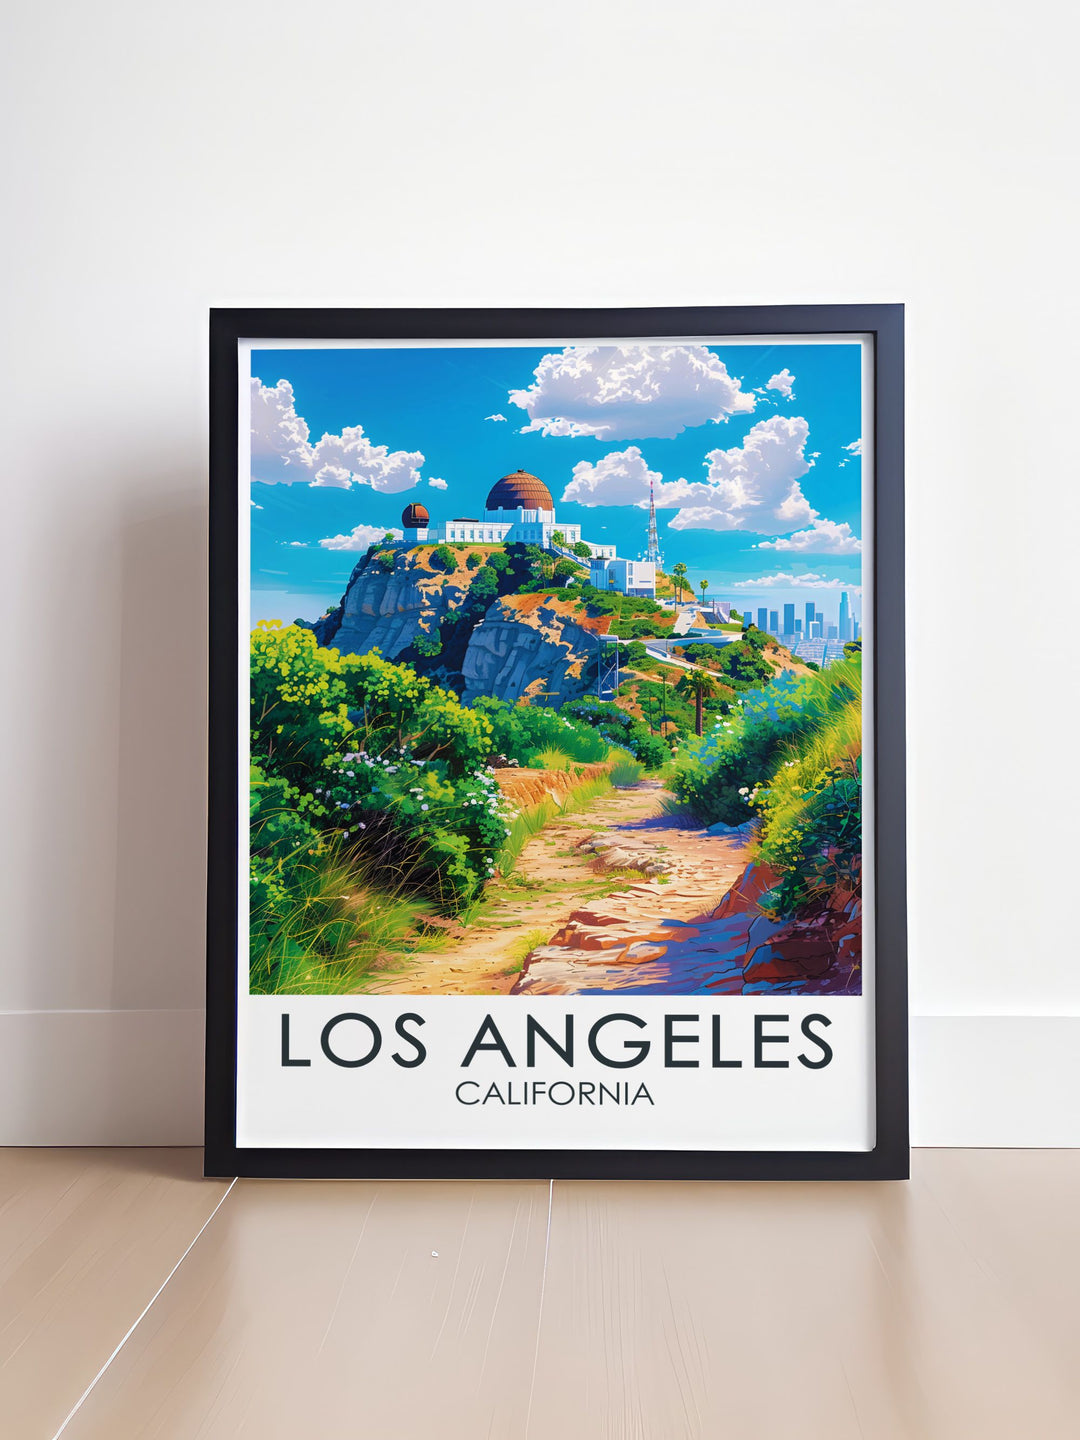 Griffith Observatory wall art showcasing the stunning views of Los Angeles perfect for adding sophistication and elegance to your home decor a unique and meaningful addition to your collection of California prints and Los Angeles photos